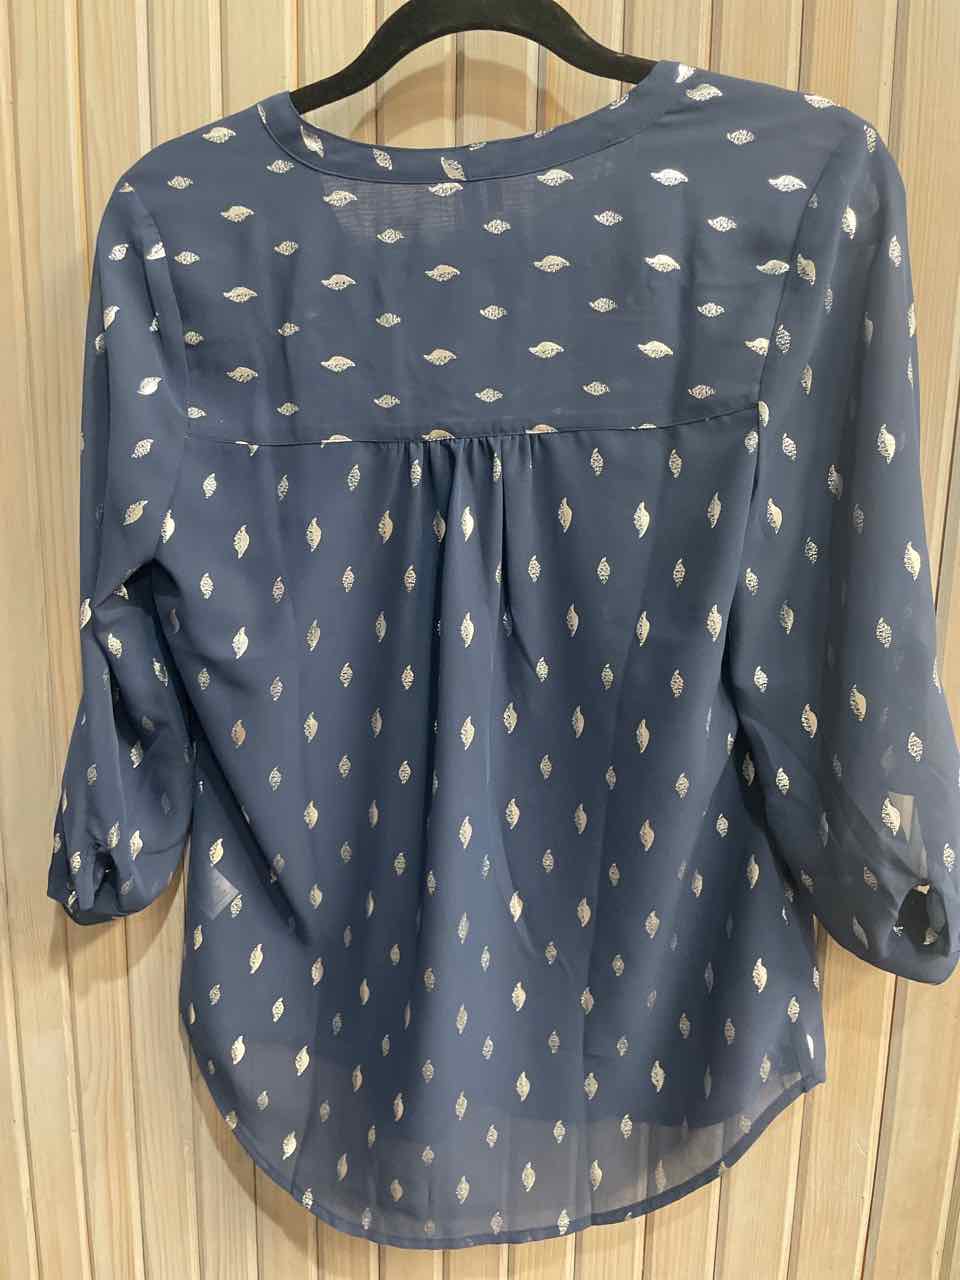 S - Maurices 3/4 Sleeve